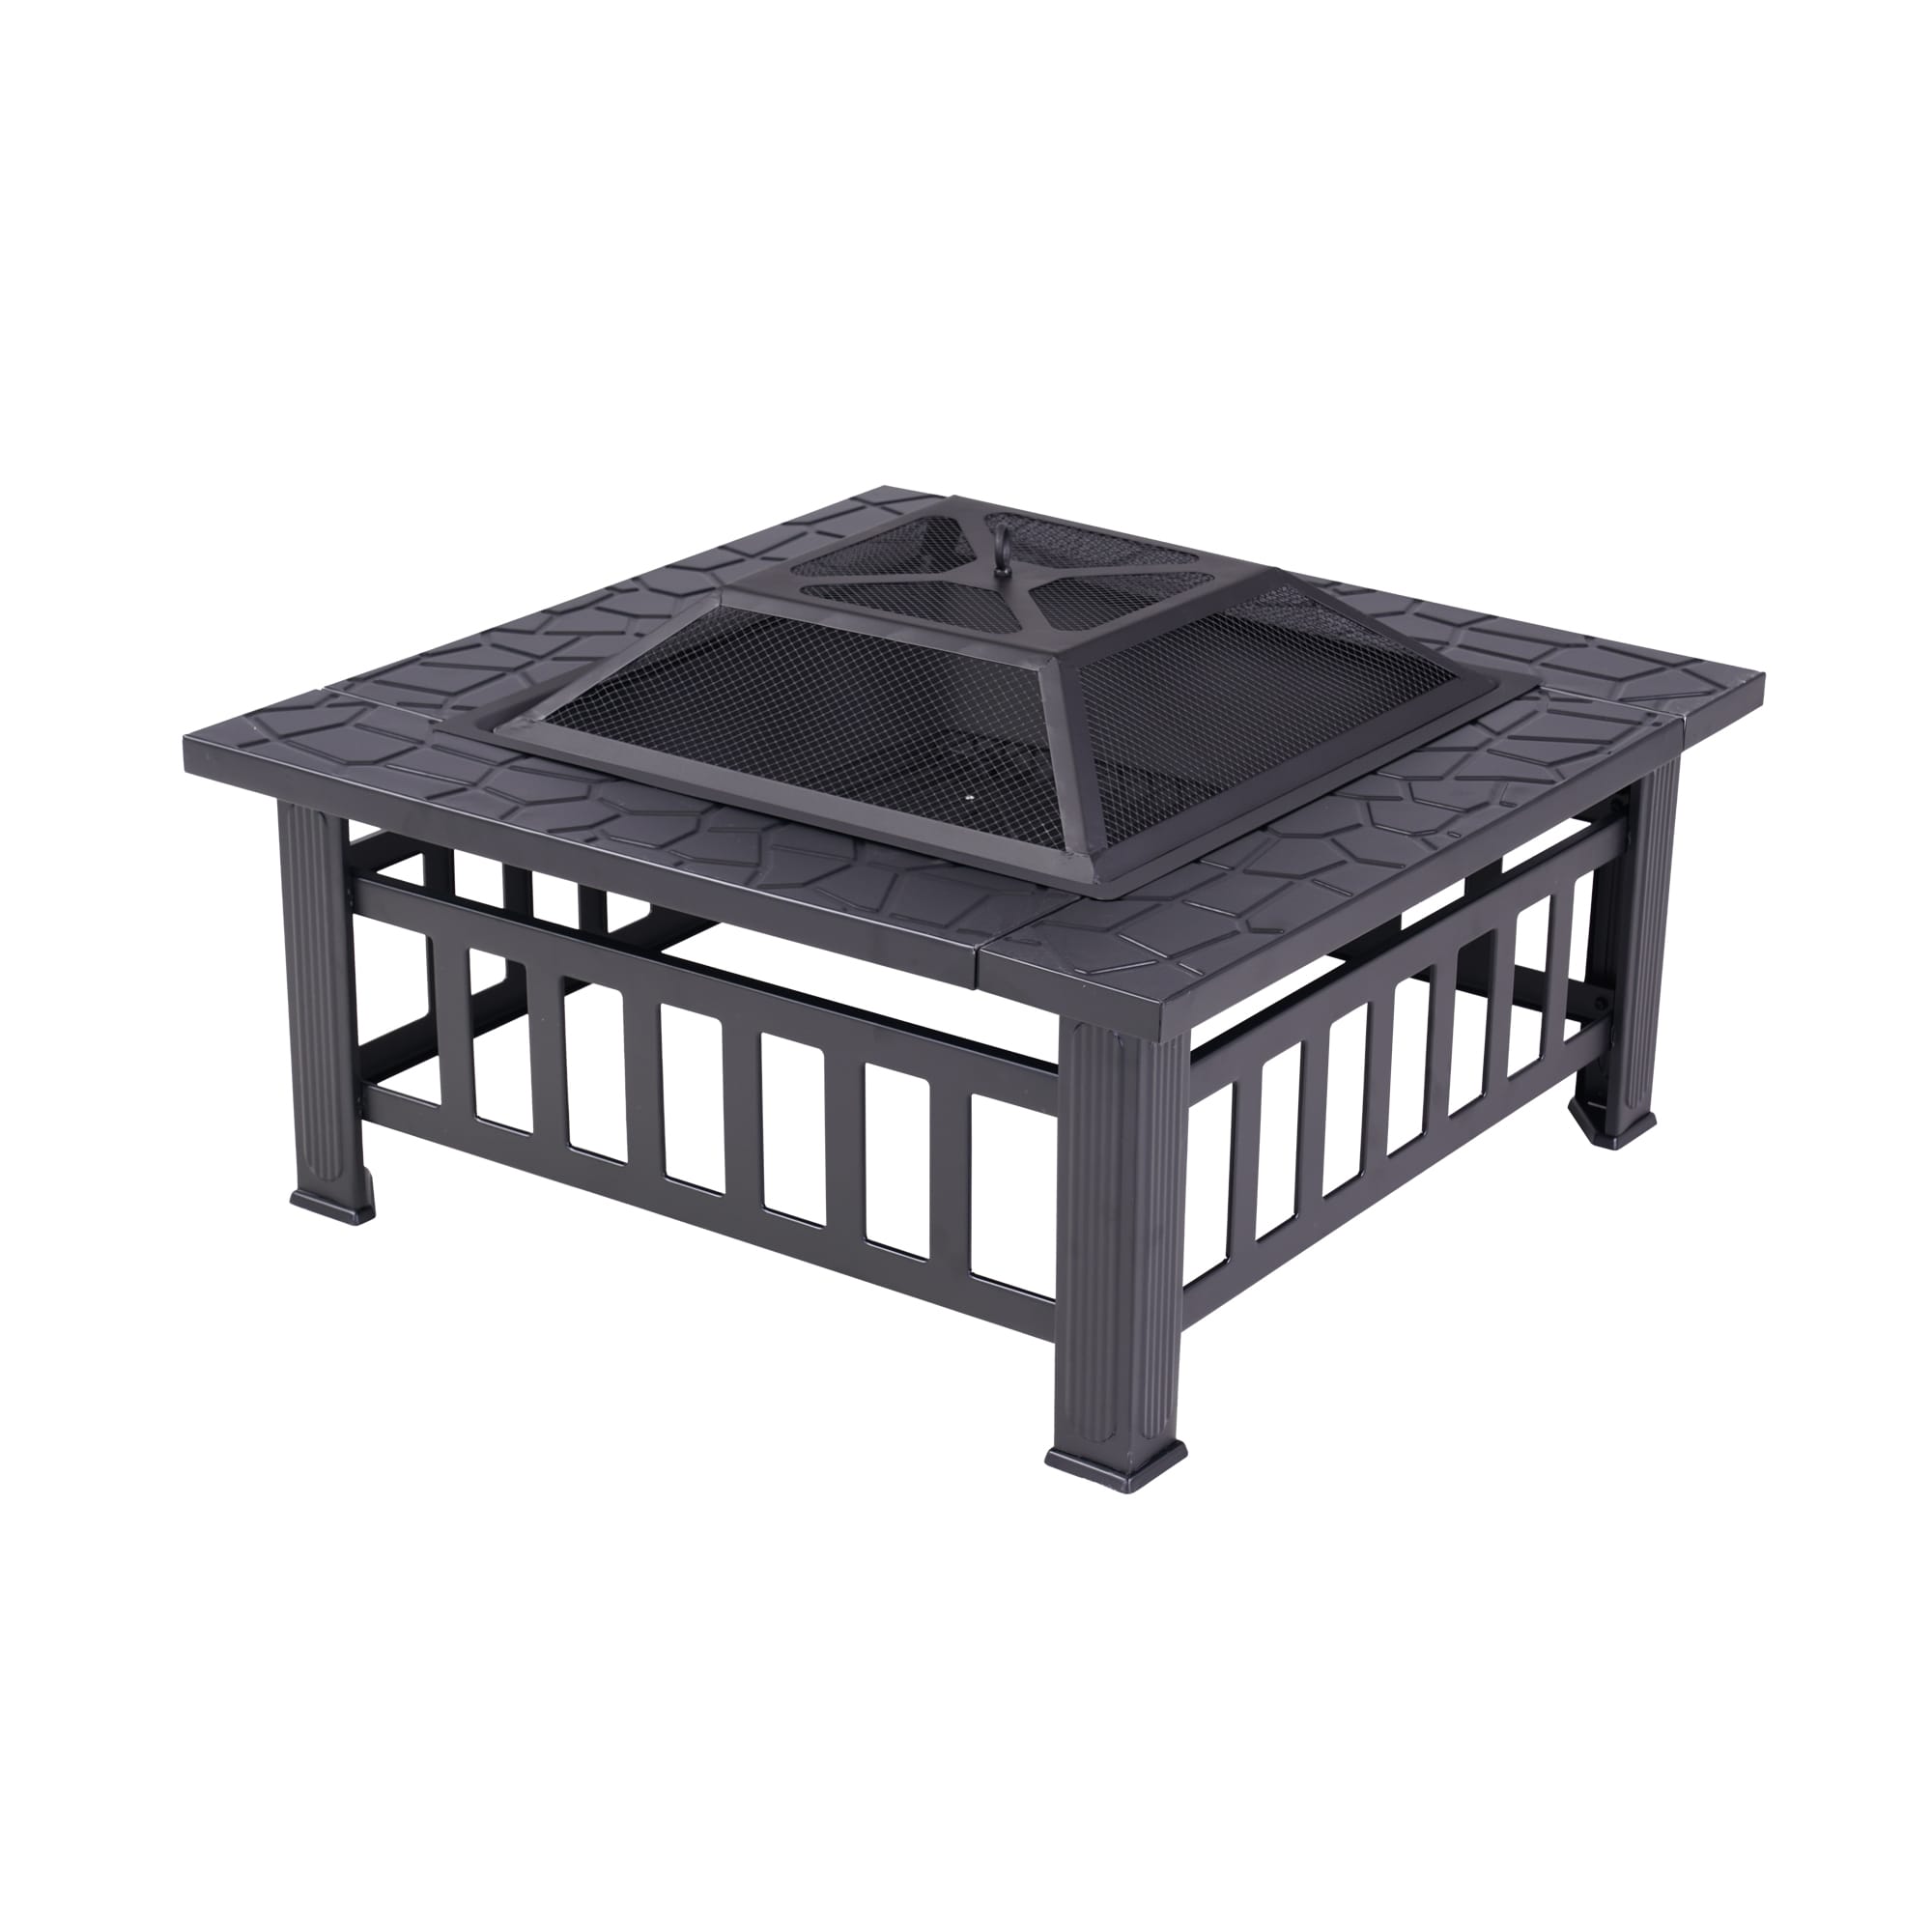 31.89 in. W x 31.89 in. D Square Stone Pattern Tabletop Charcoal Brazier with Lid and Fire Stick